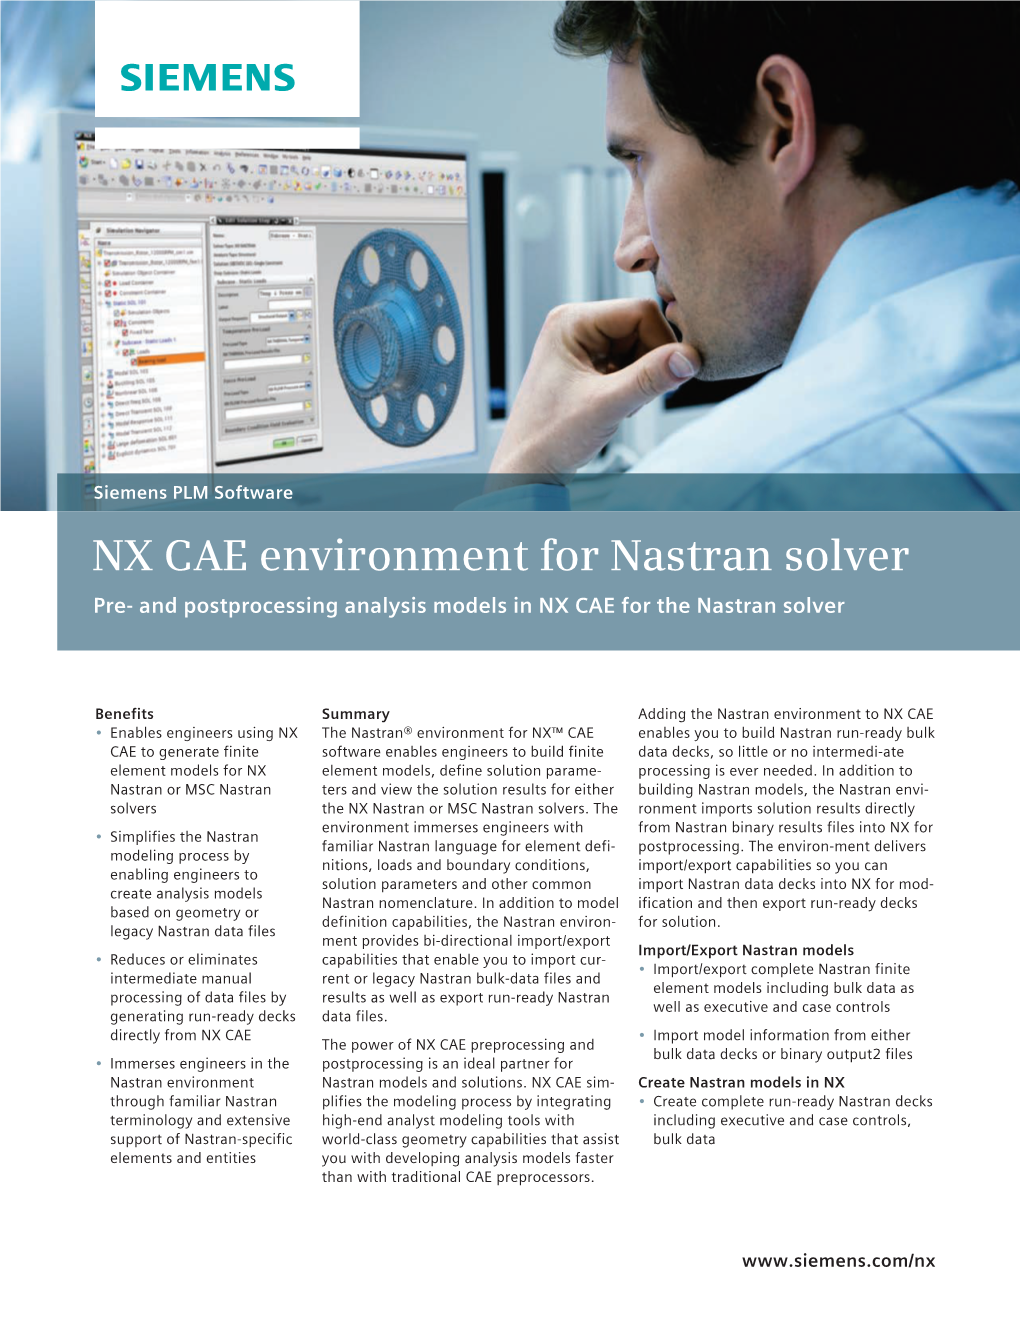 NX CAE Environment for Nastran Solver Pre- and Postprocessing Analysis Models in NX CAE for the Nastran Solver